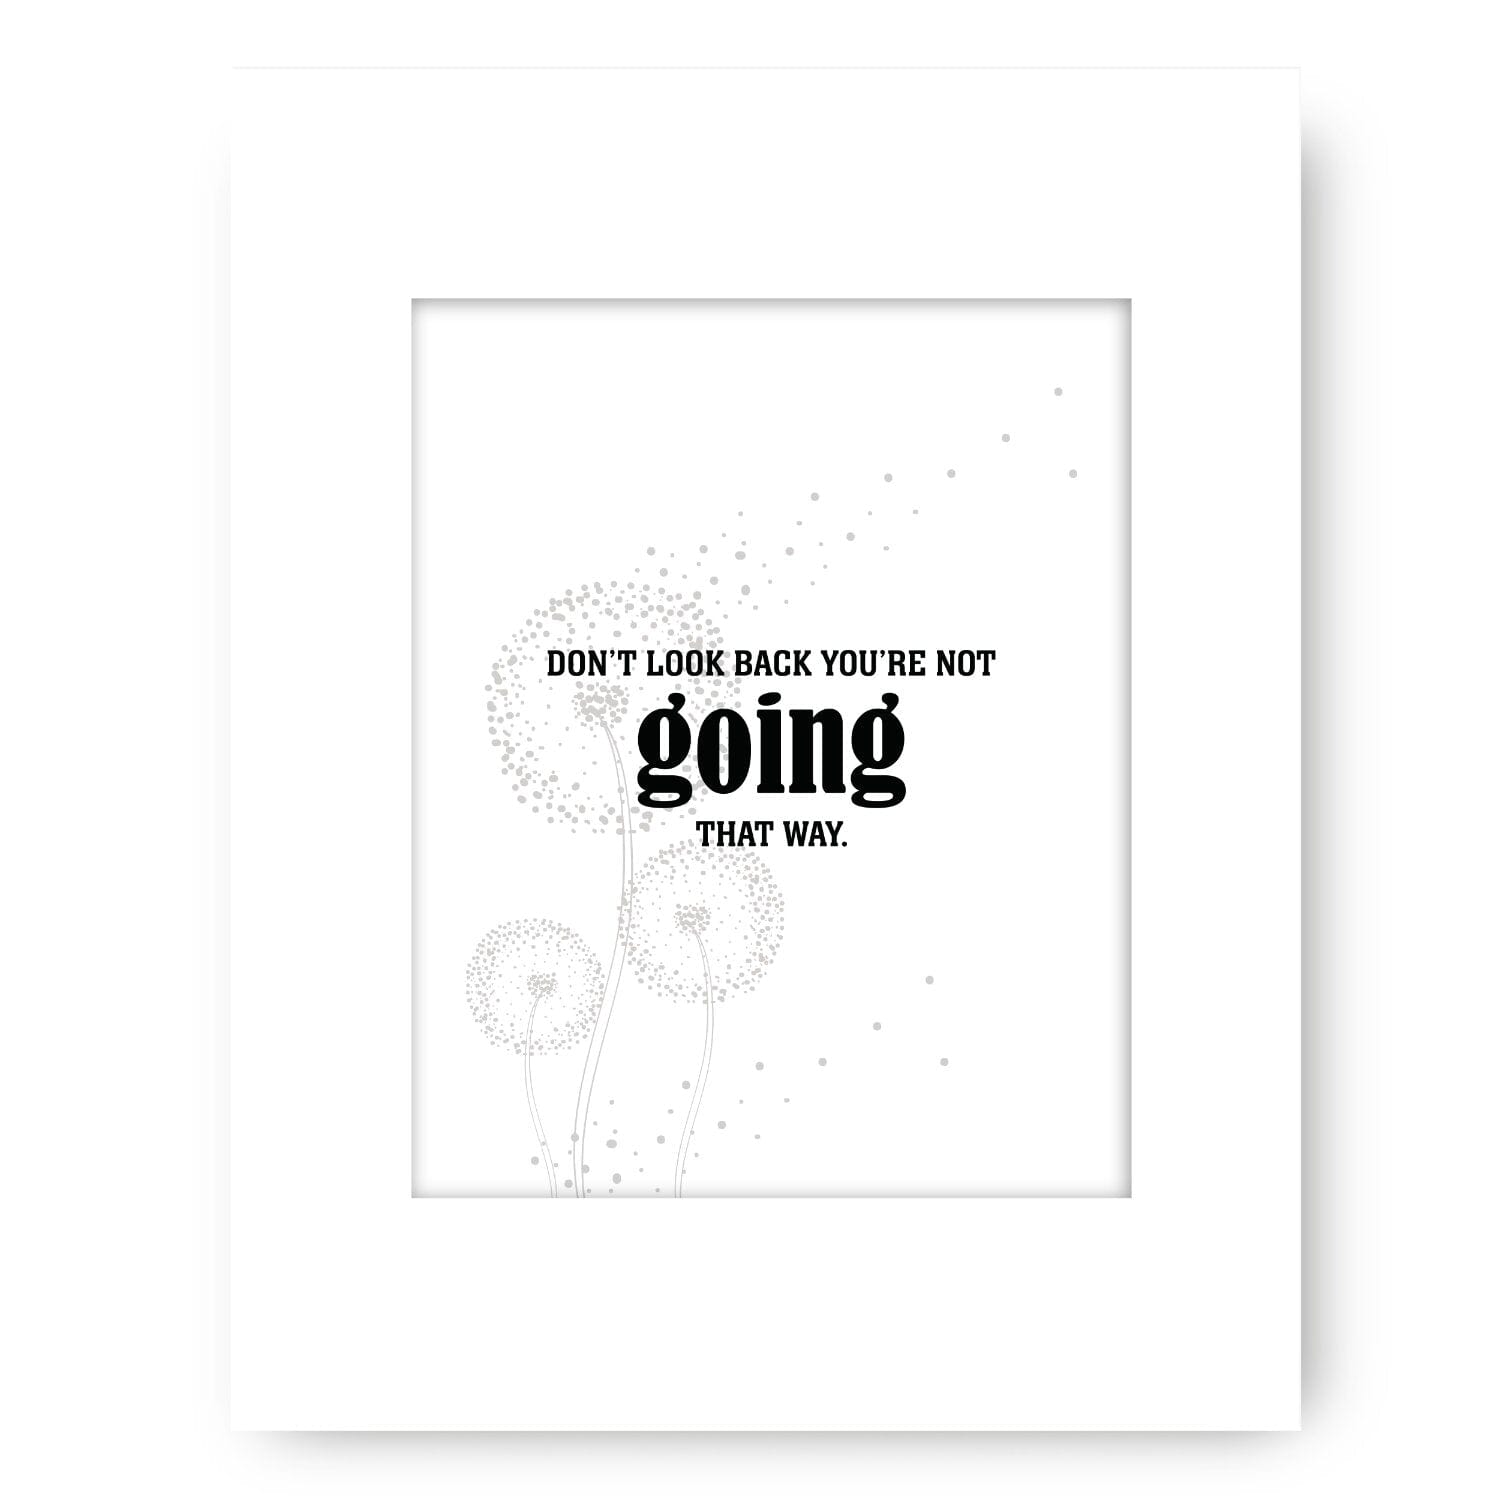 Don't Look Back You're Not Going that Way - Wise Witty Art Wise and Wiseass Quotes Song Lyrics Art 8x10 White Matted Print 